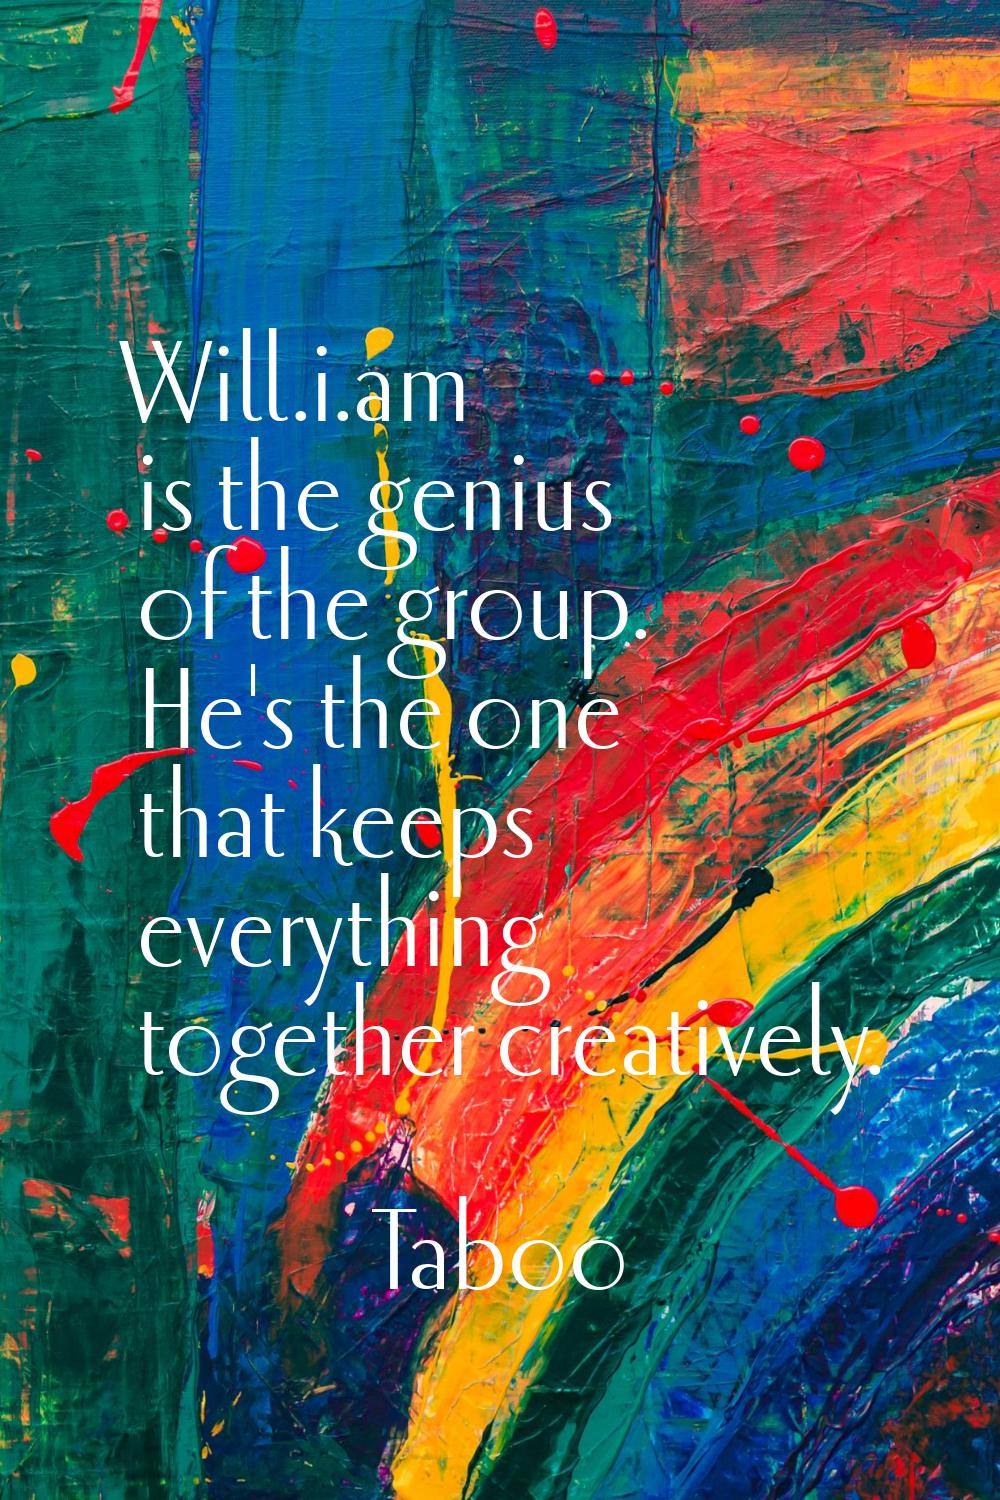 Will.i.am is the genius of the group. He's the one that keeps everything together creatively.